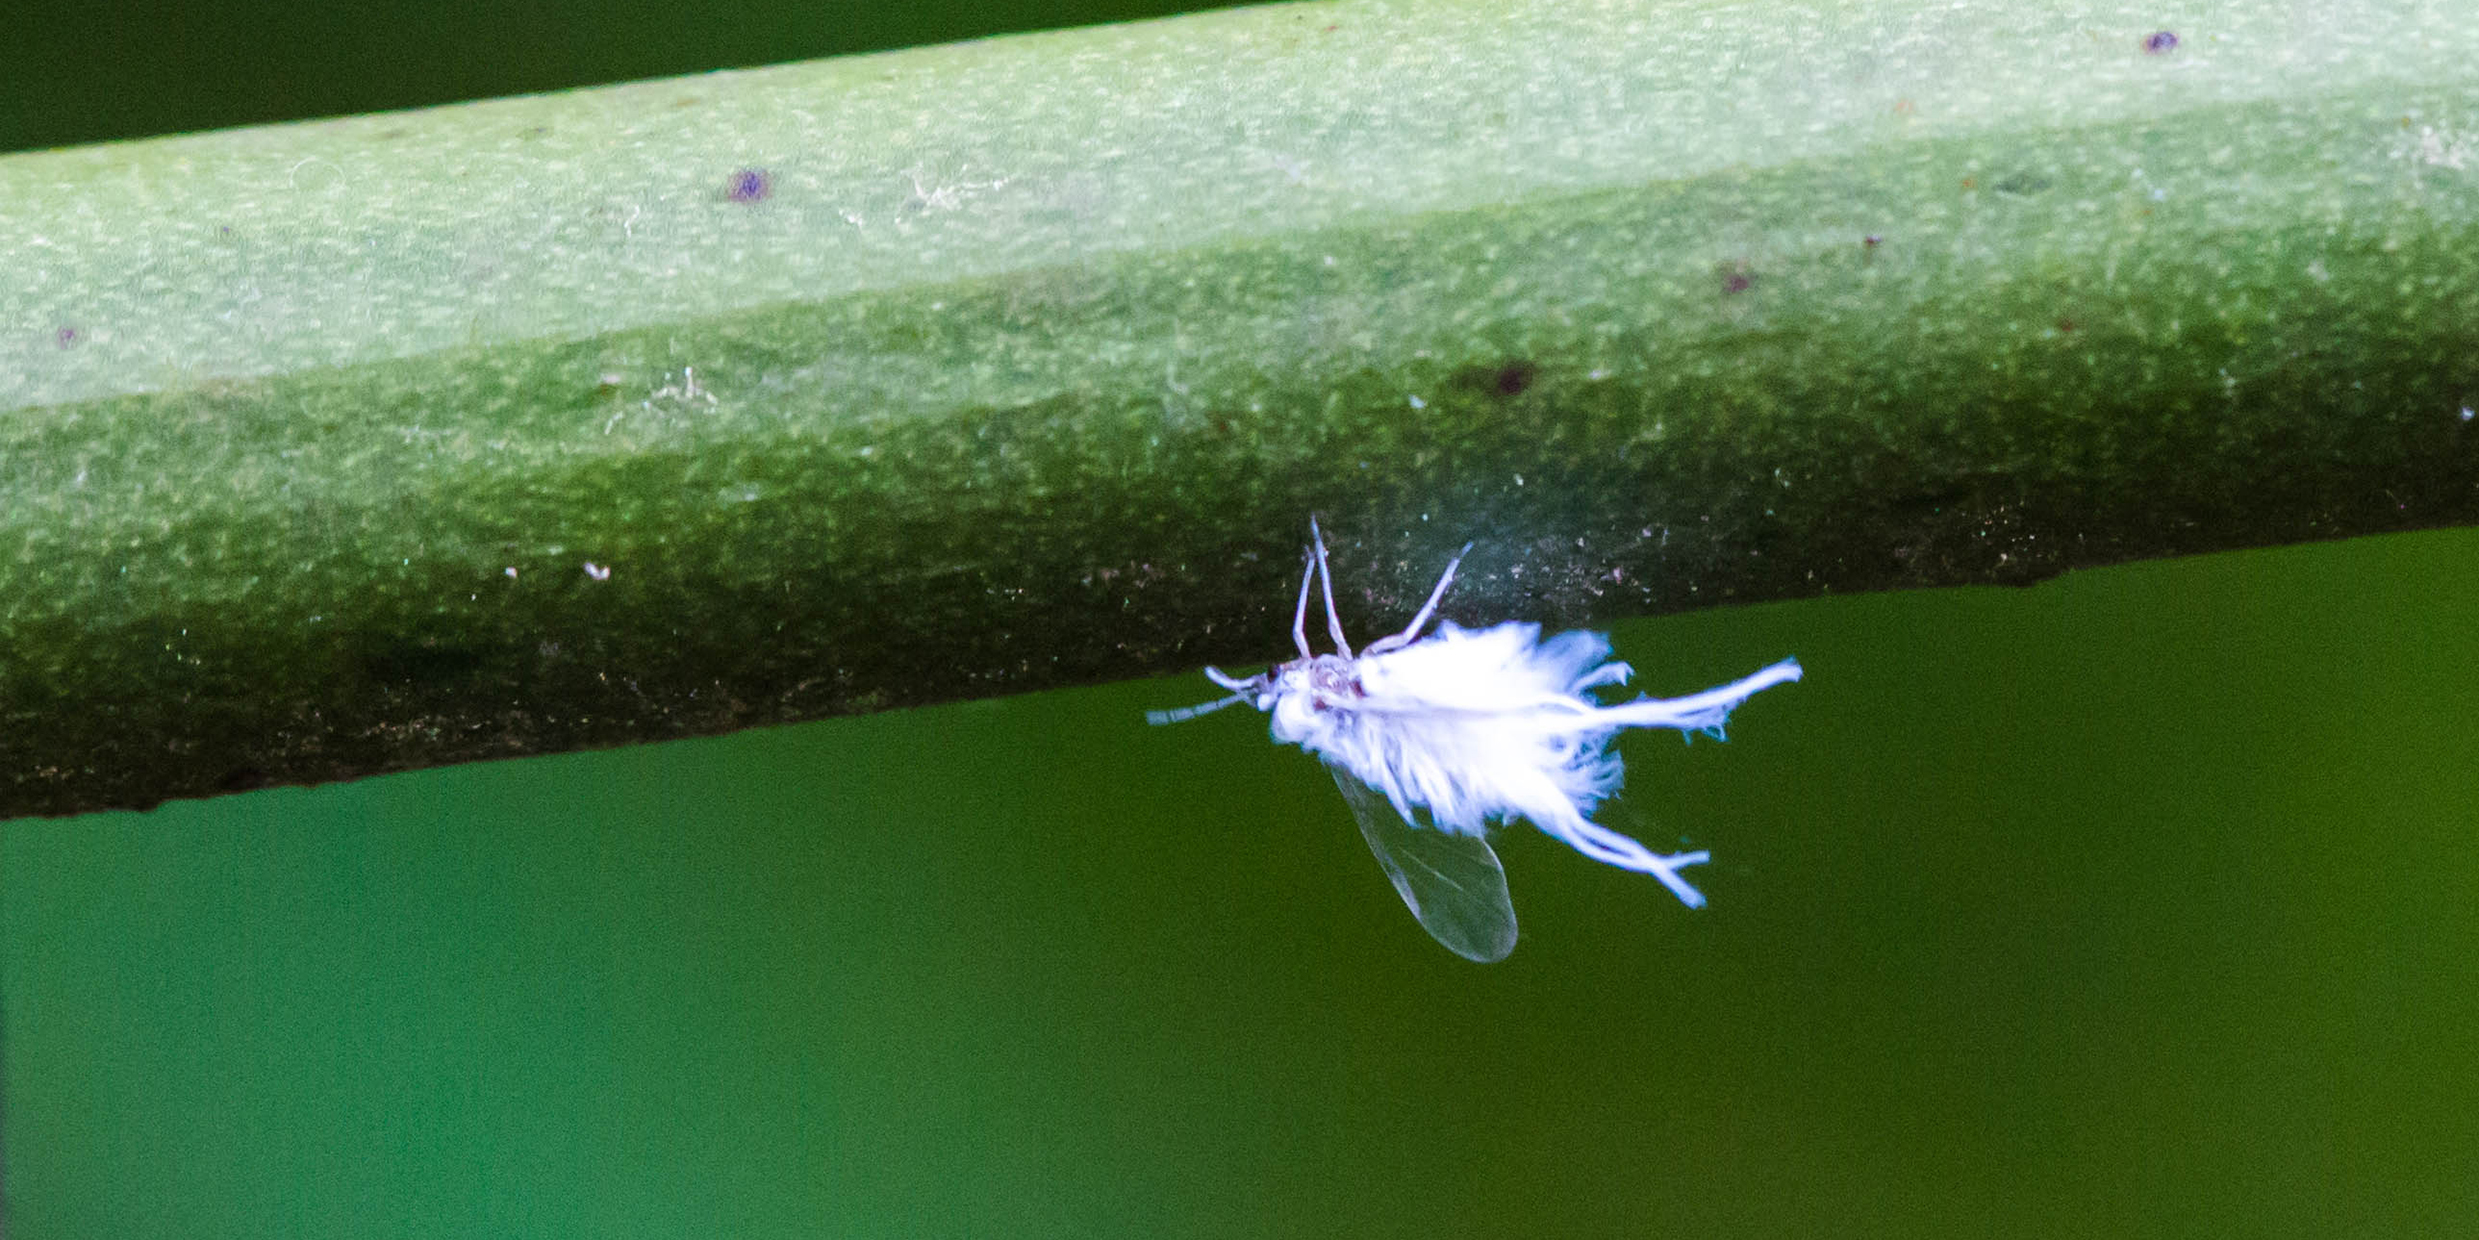 Image of wooly aphid hanging from plant stem